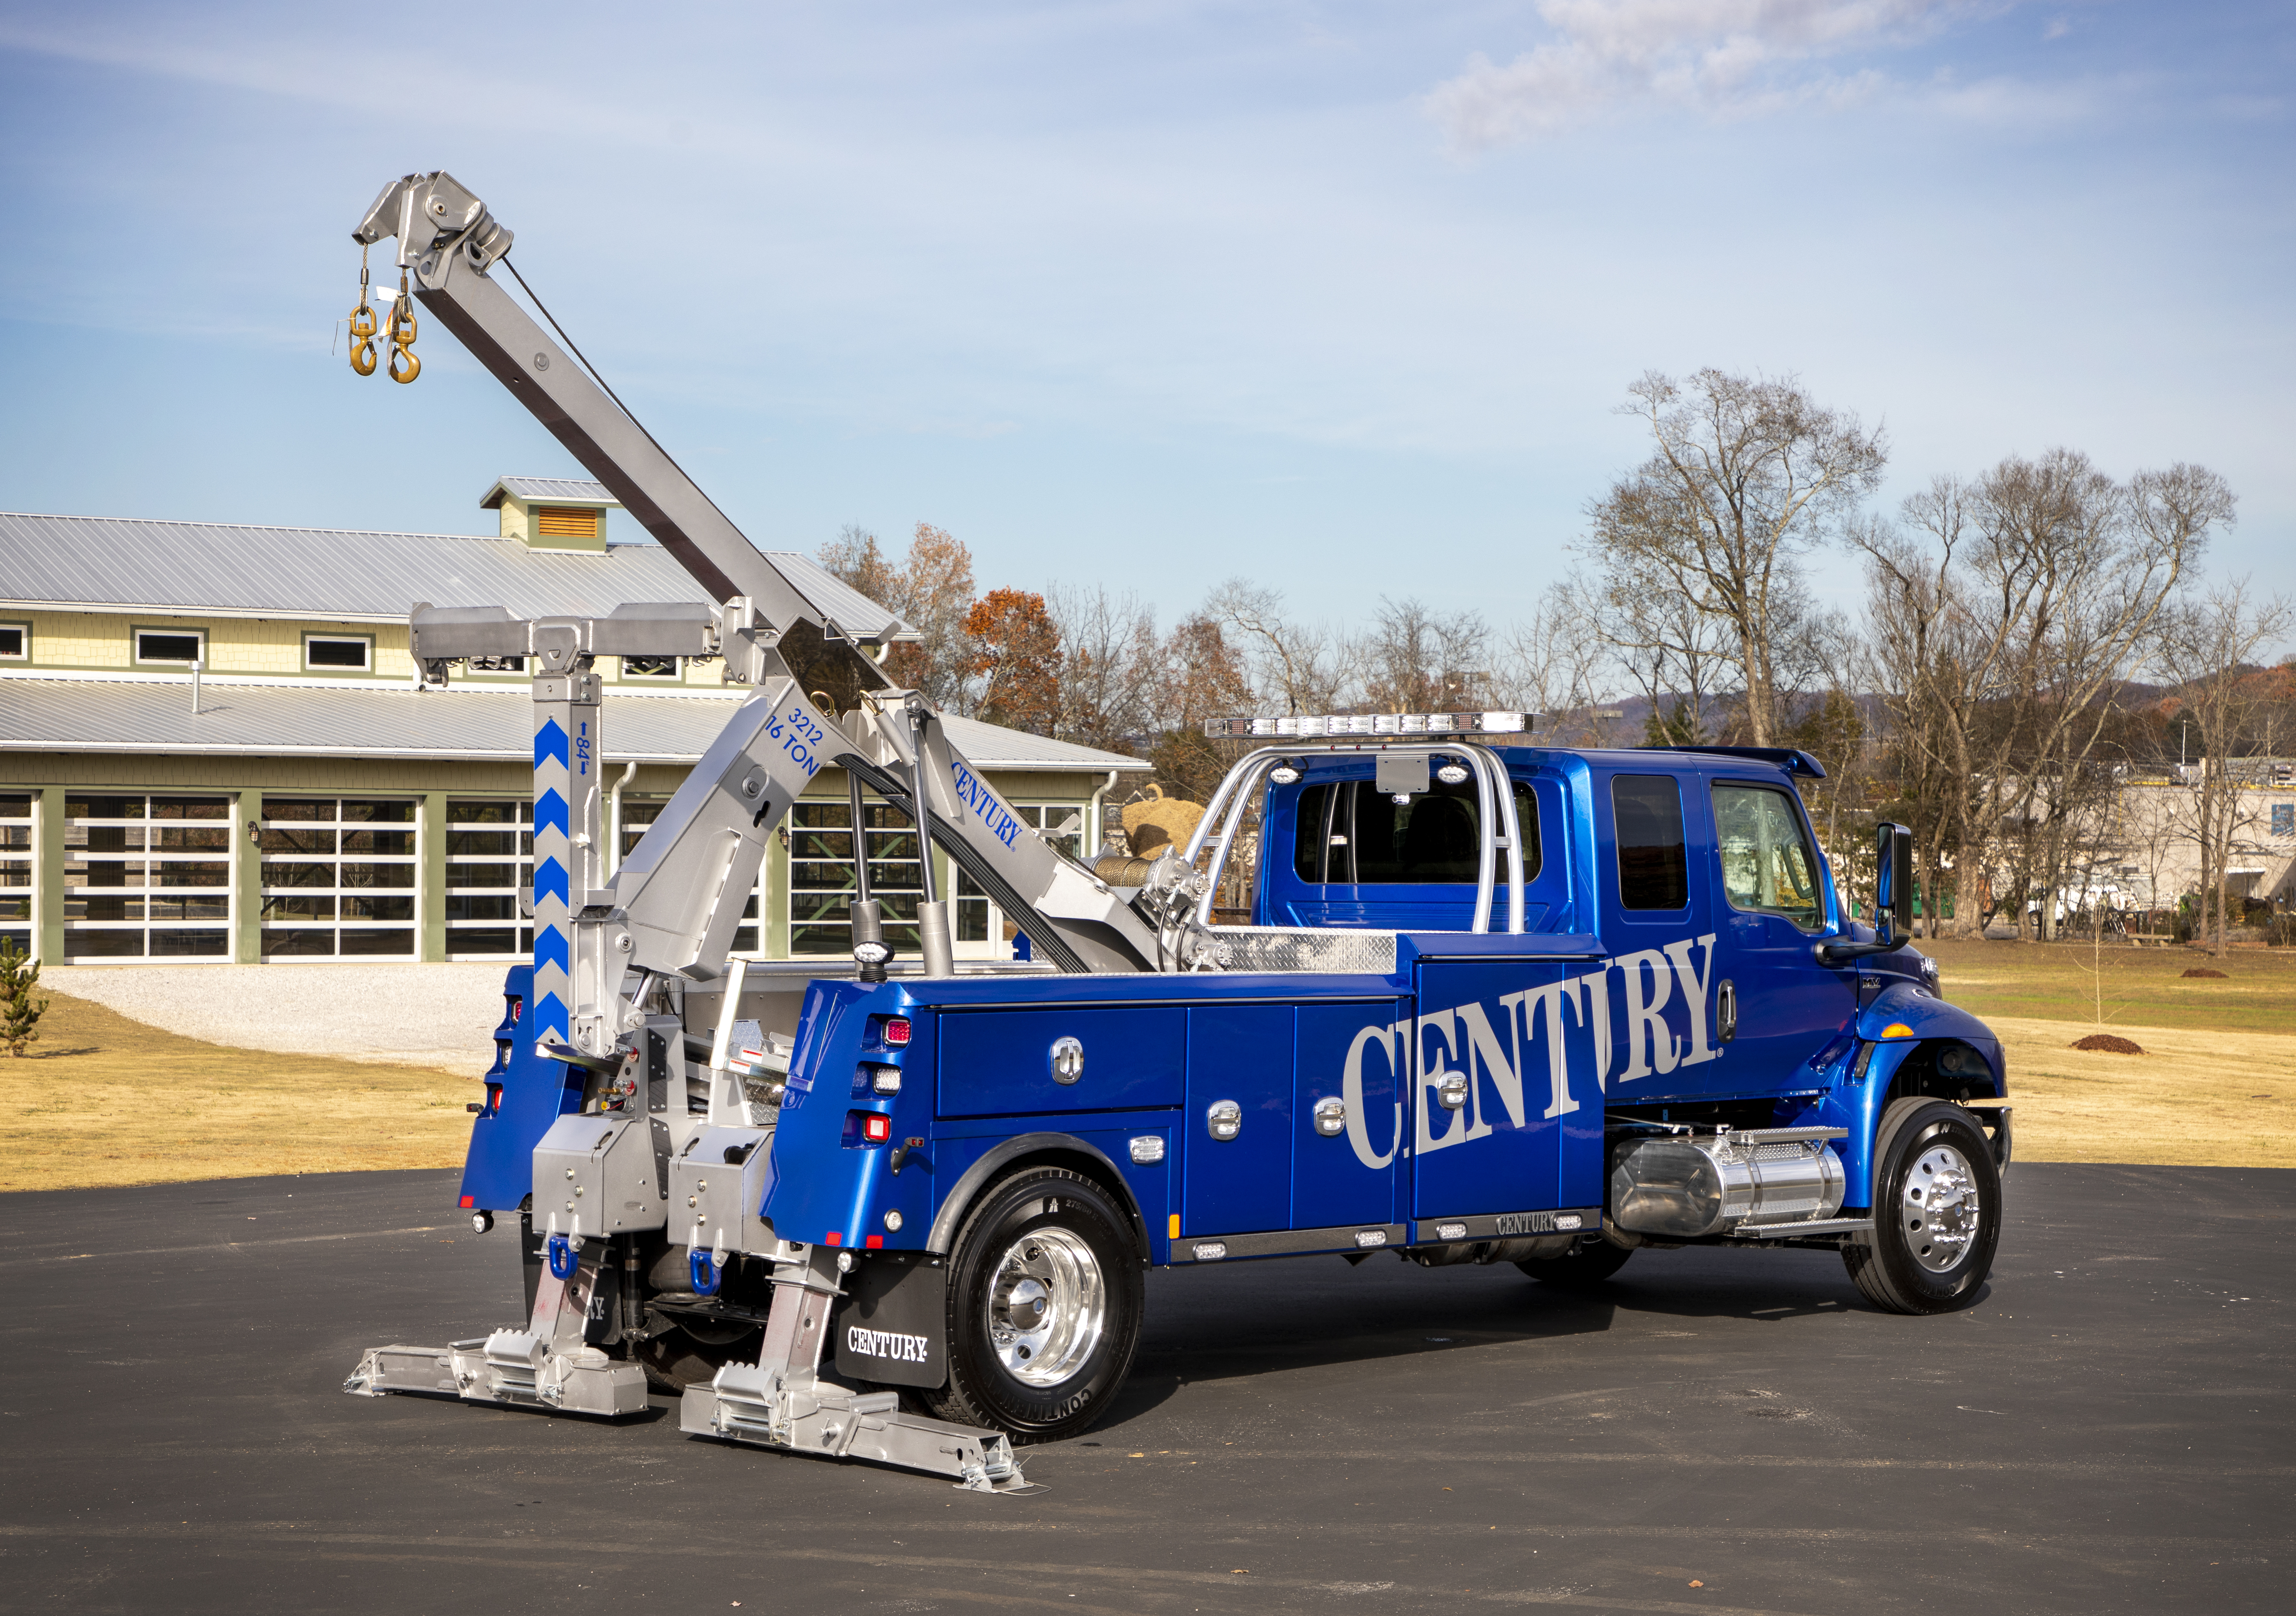 Century® 3212 G2 Medium-Duty Integrated Wrecker comes with rear extendable jacks for stability